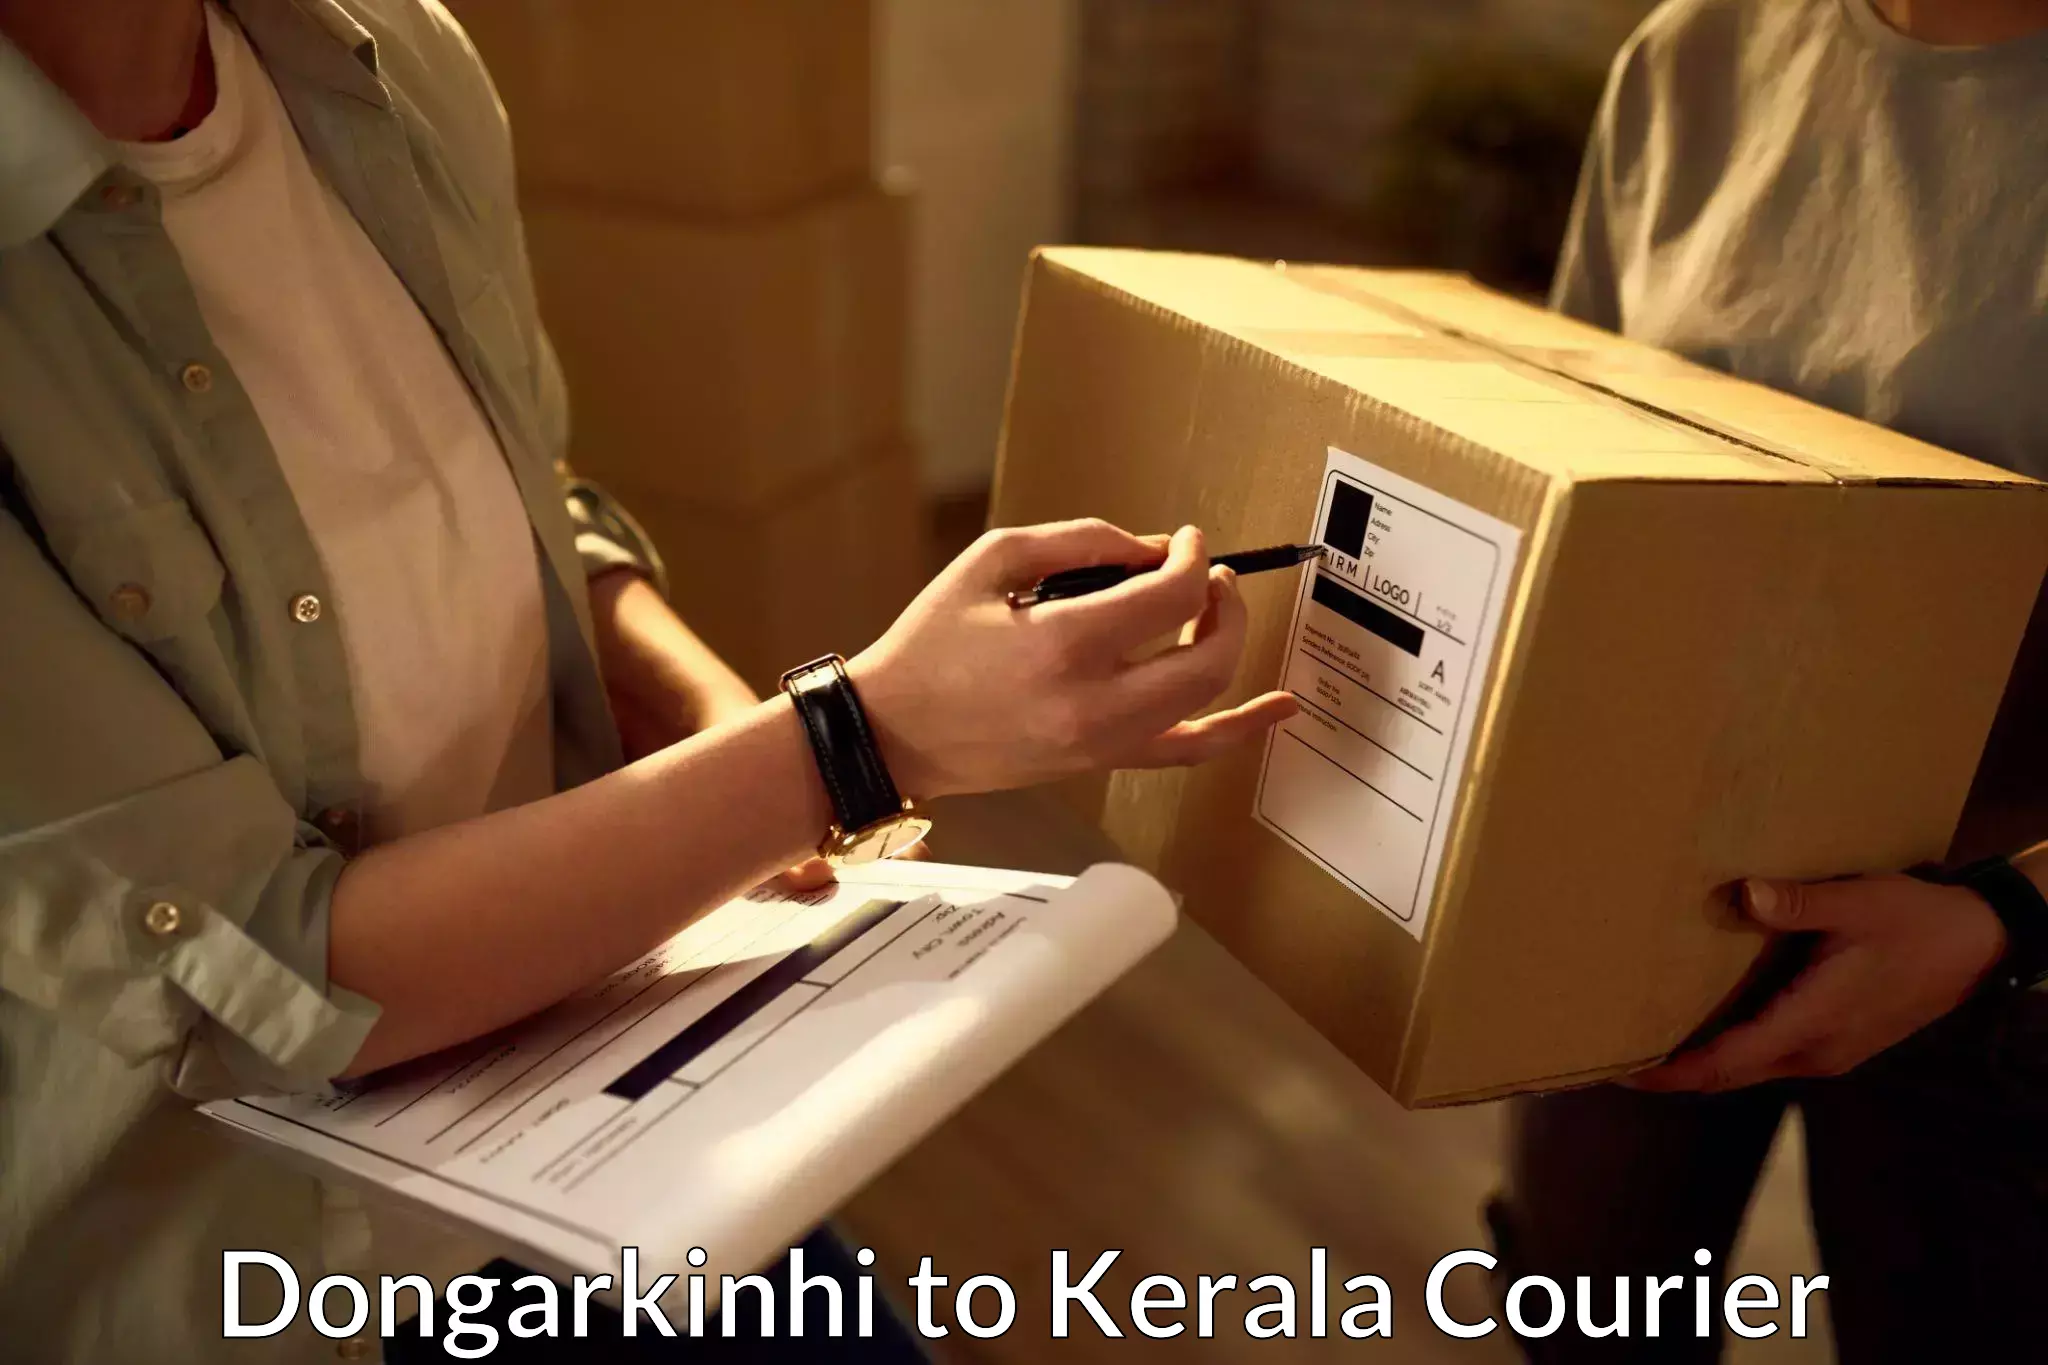 Local delivery service Dongarkinhi to Calicut